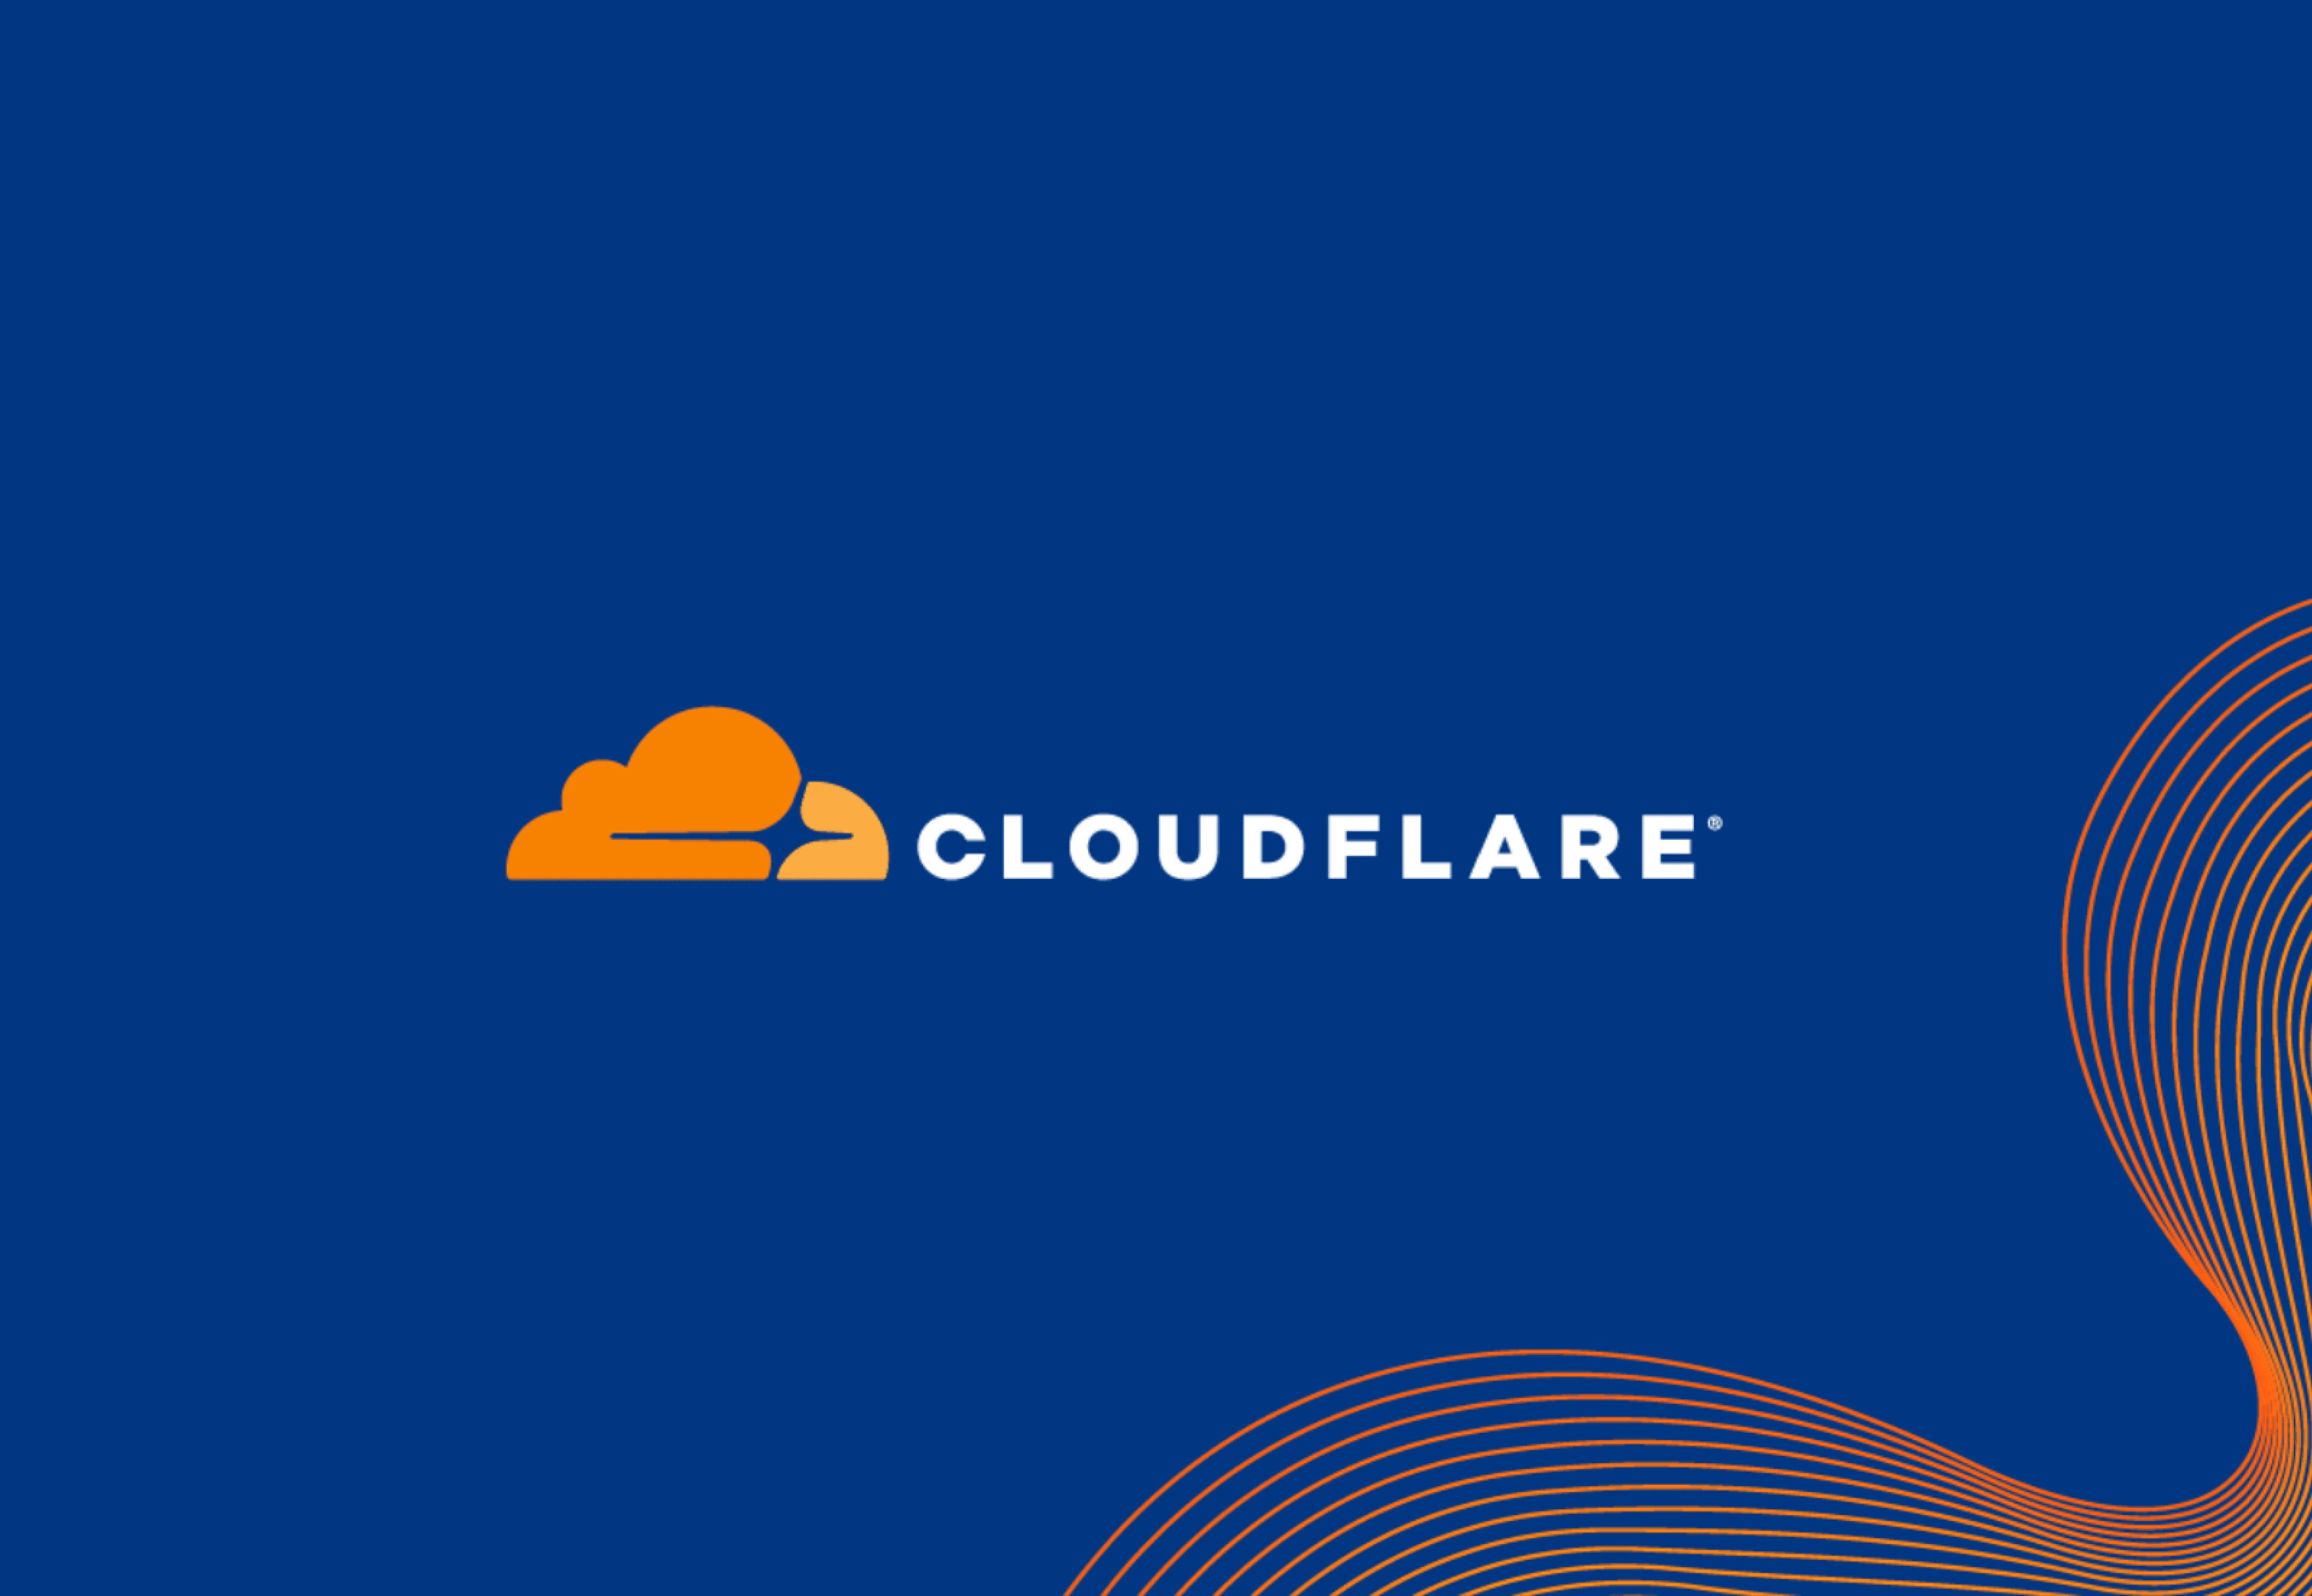 Introducing Cloudflare: The protector